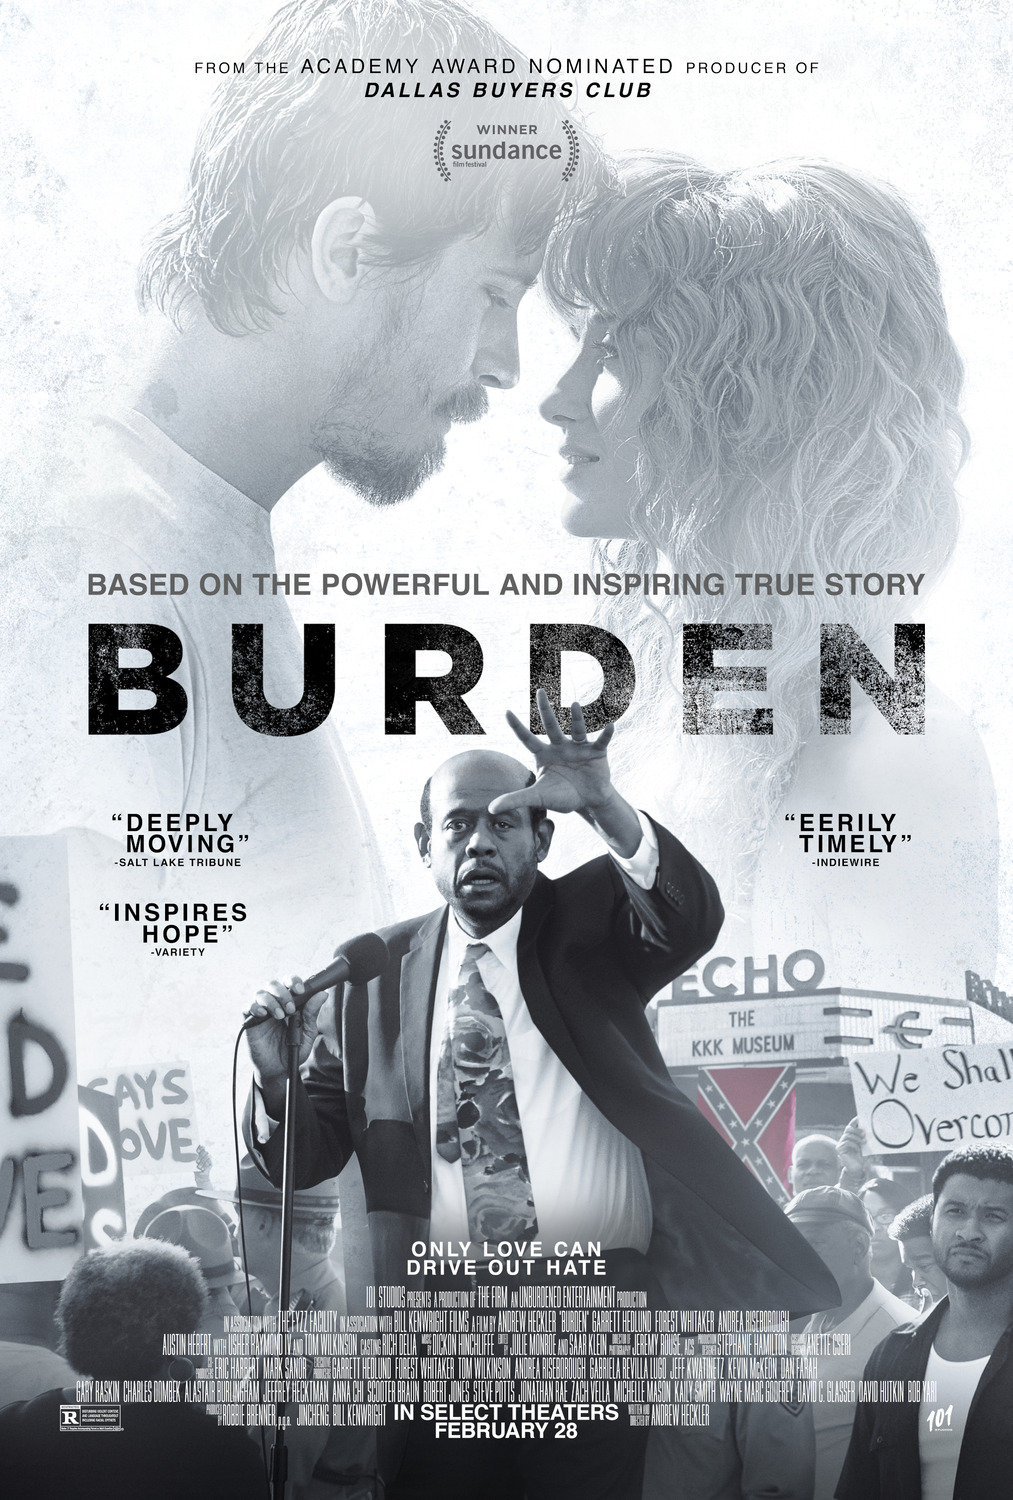 Extra Large Movie Poster Image for Burden (#1 of 2)